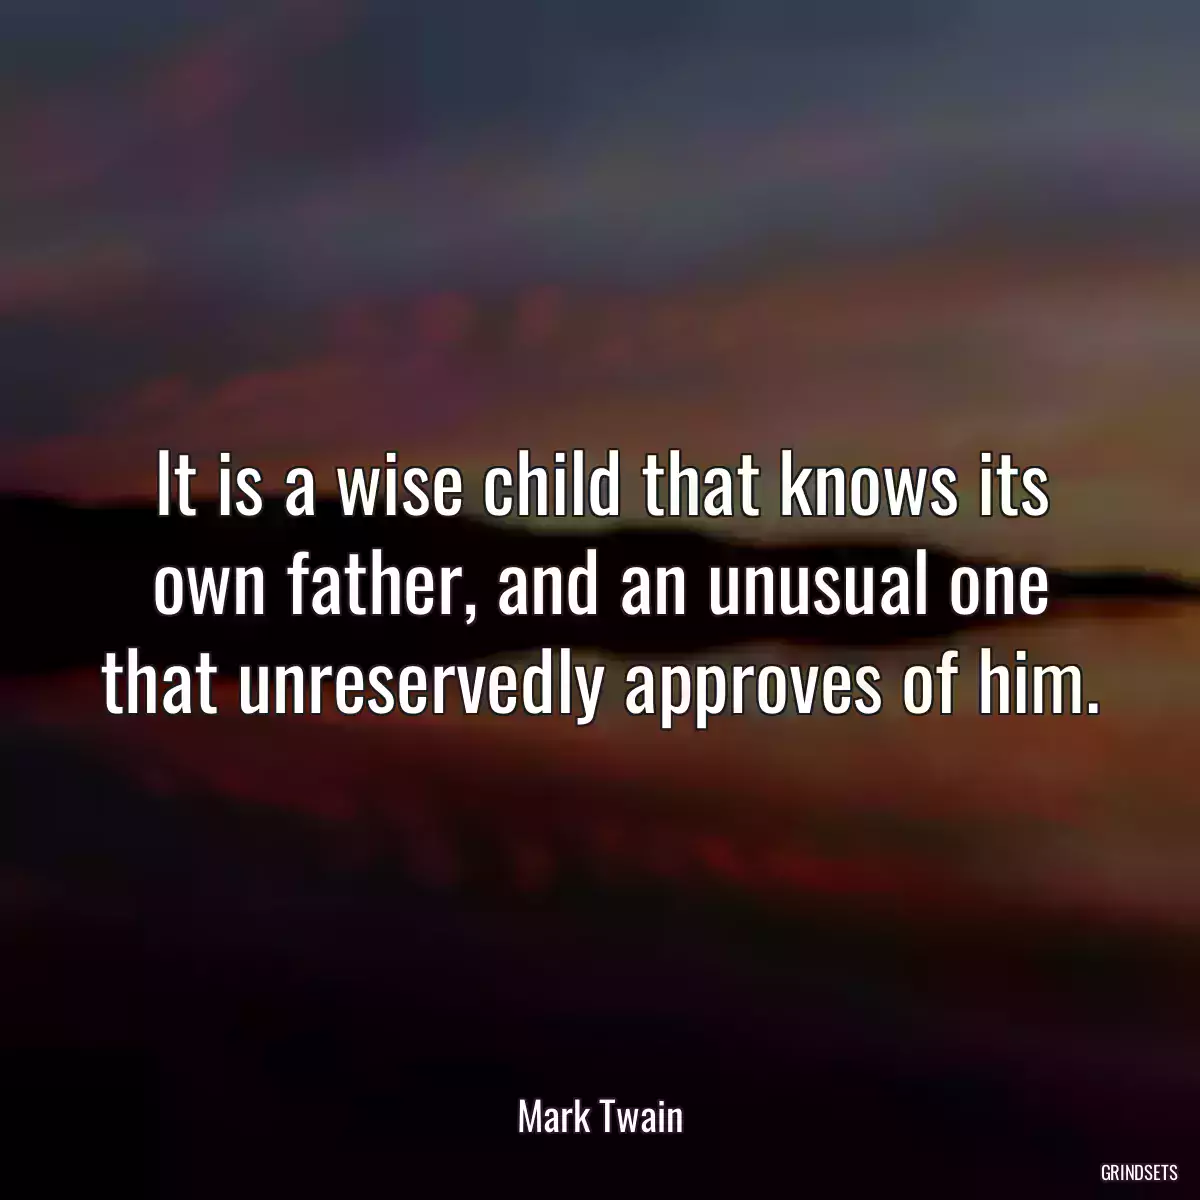 It is a wise child that knows its own father, and an unusual one that unreservedly approves of him.